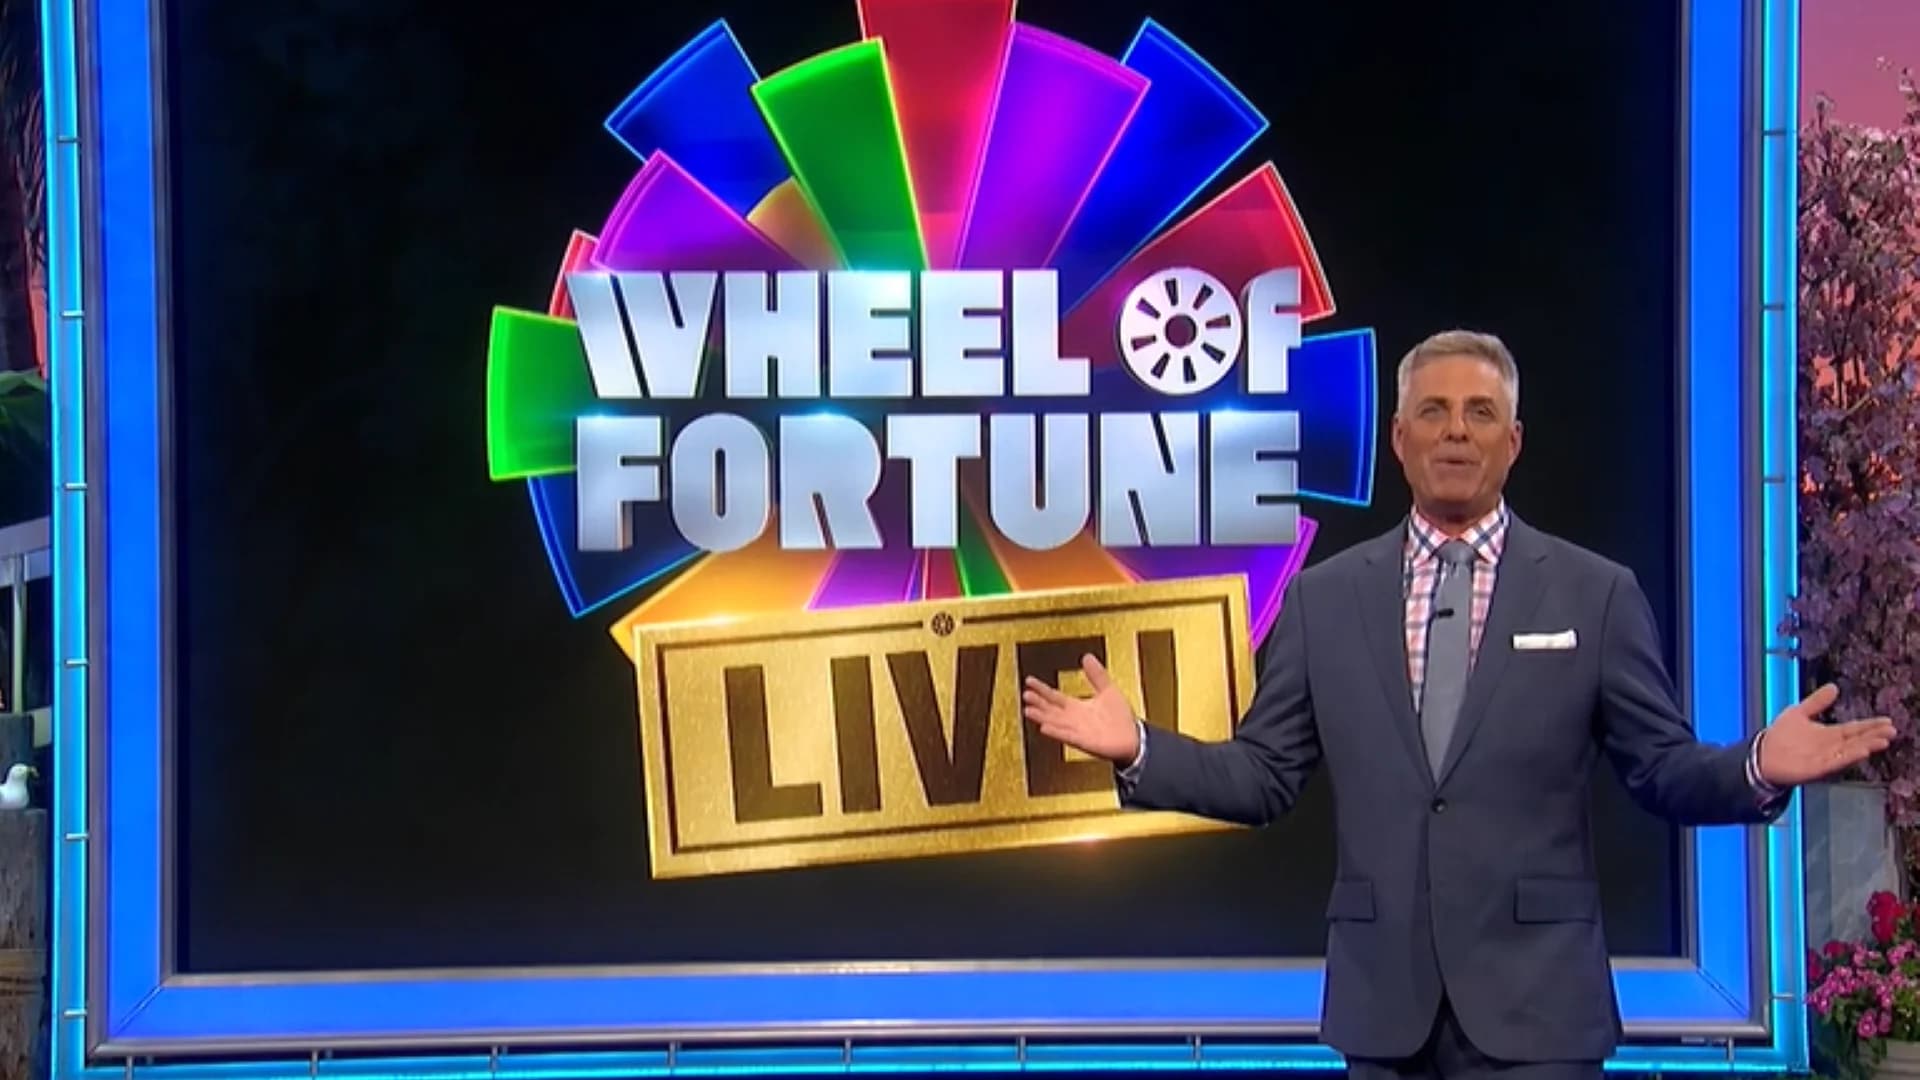 What’s Hot: Wheel of Fortune’s all-new live stage show coming to tri-state area